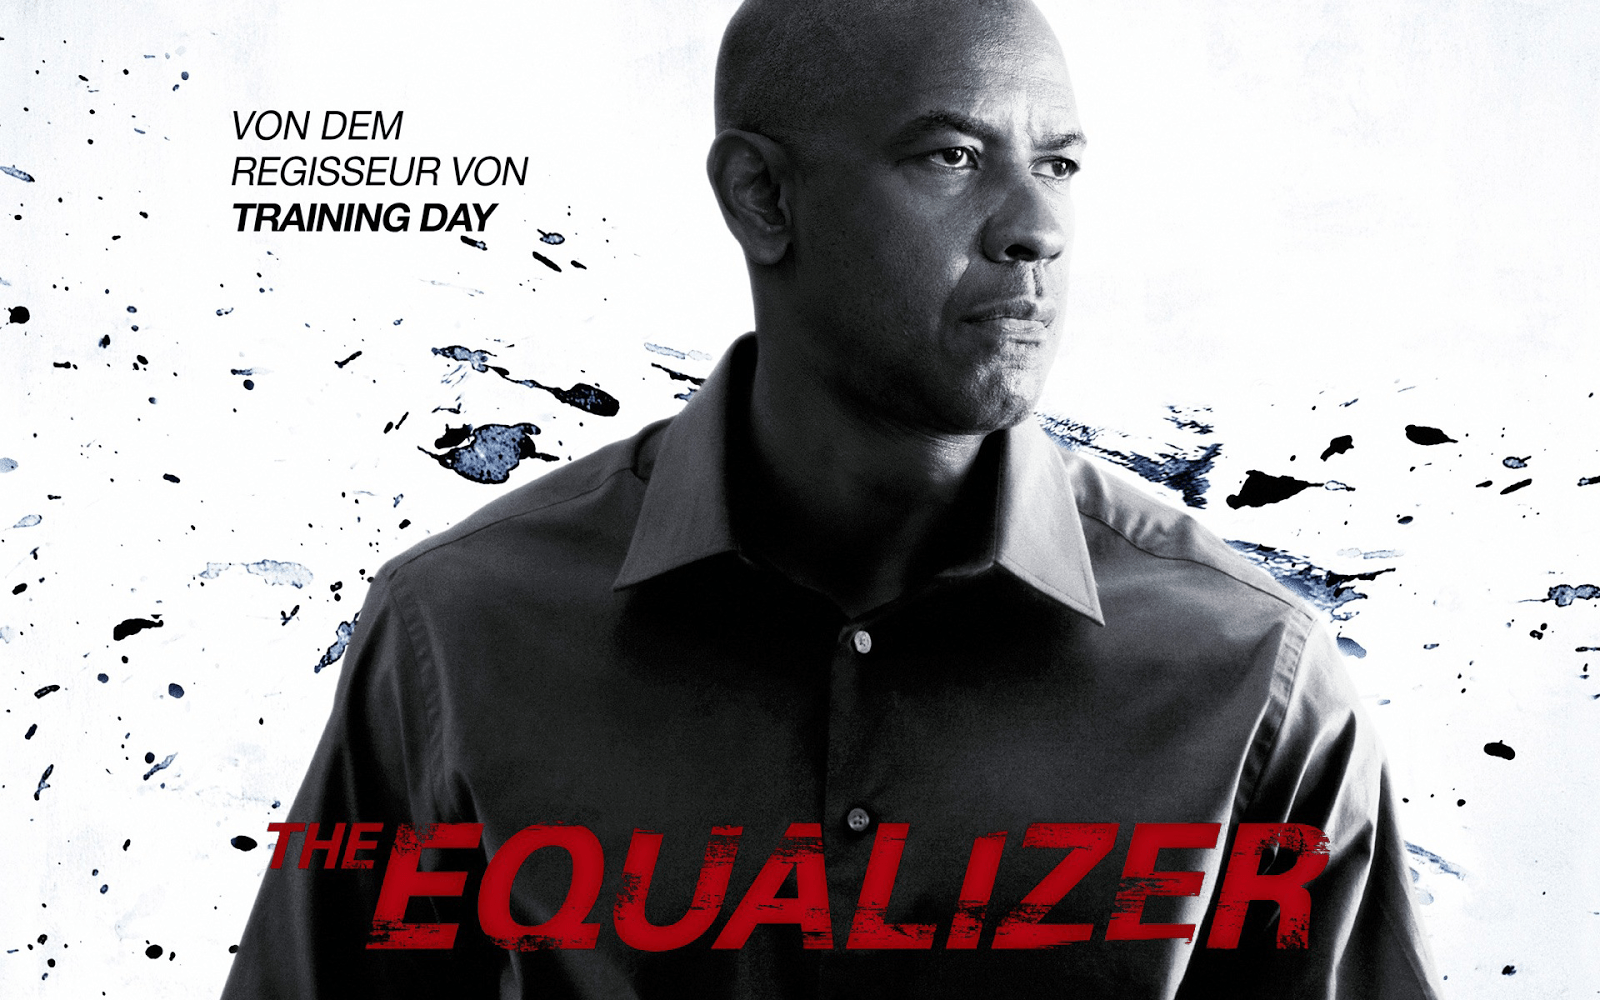 The Equalizer Hd Wallpaper. The Equalizer HD Wallpaper